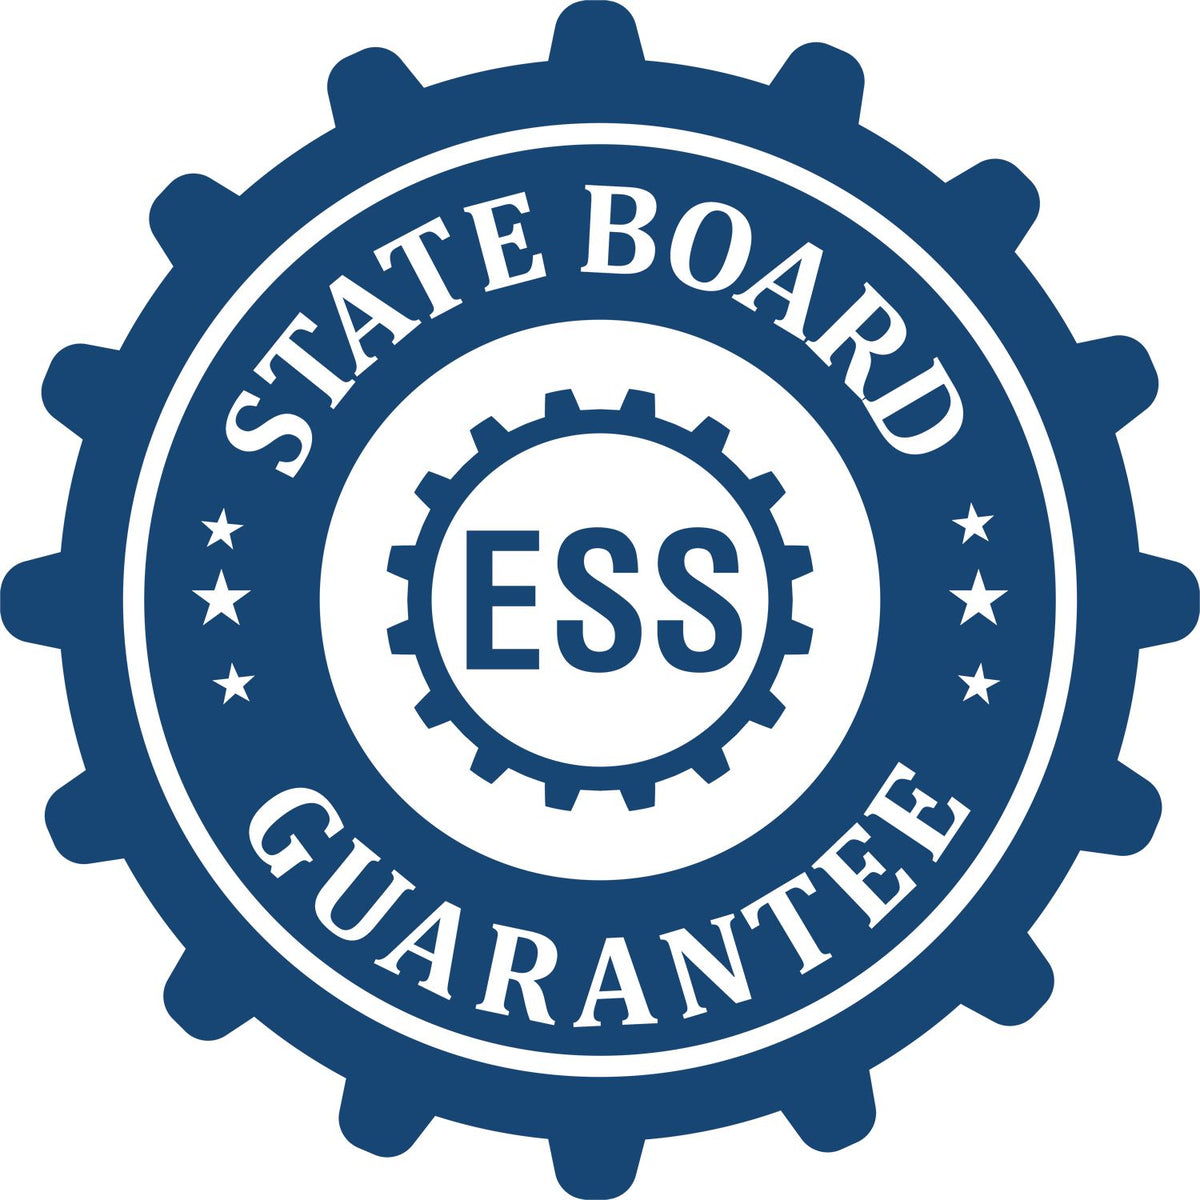 An emblem in a gear shape illustrating a state board guarantee for the Heavy-Duty Oklahoma Rectangular Notary Stamp product.